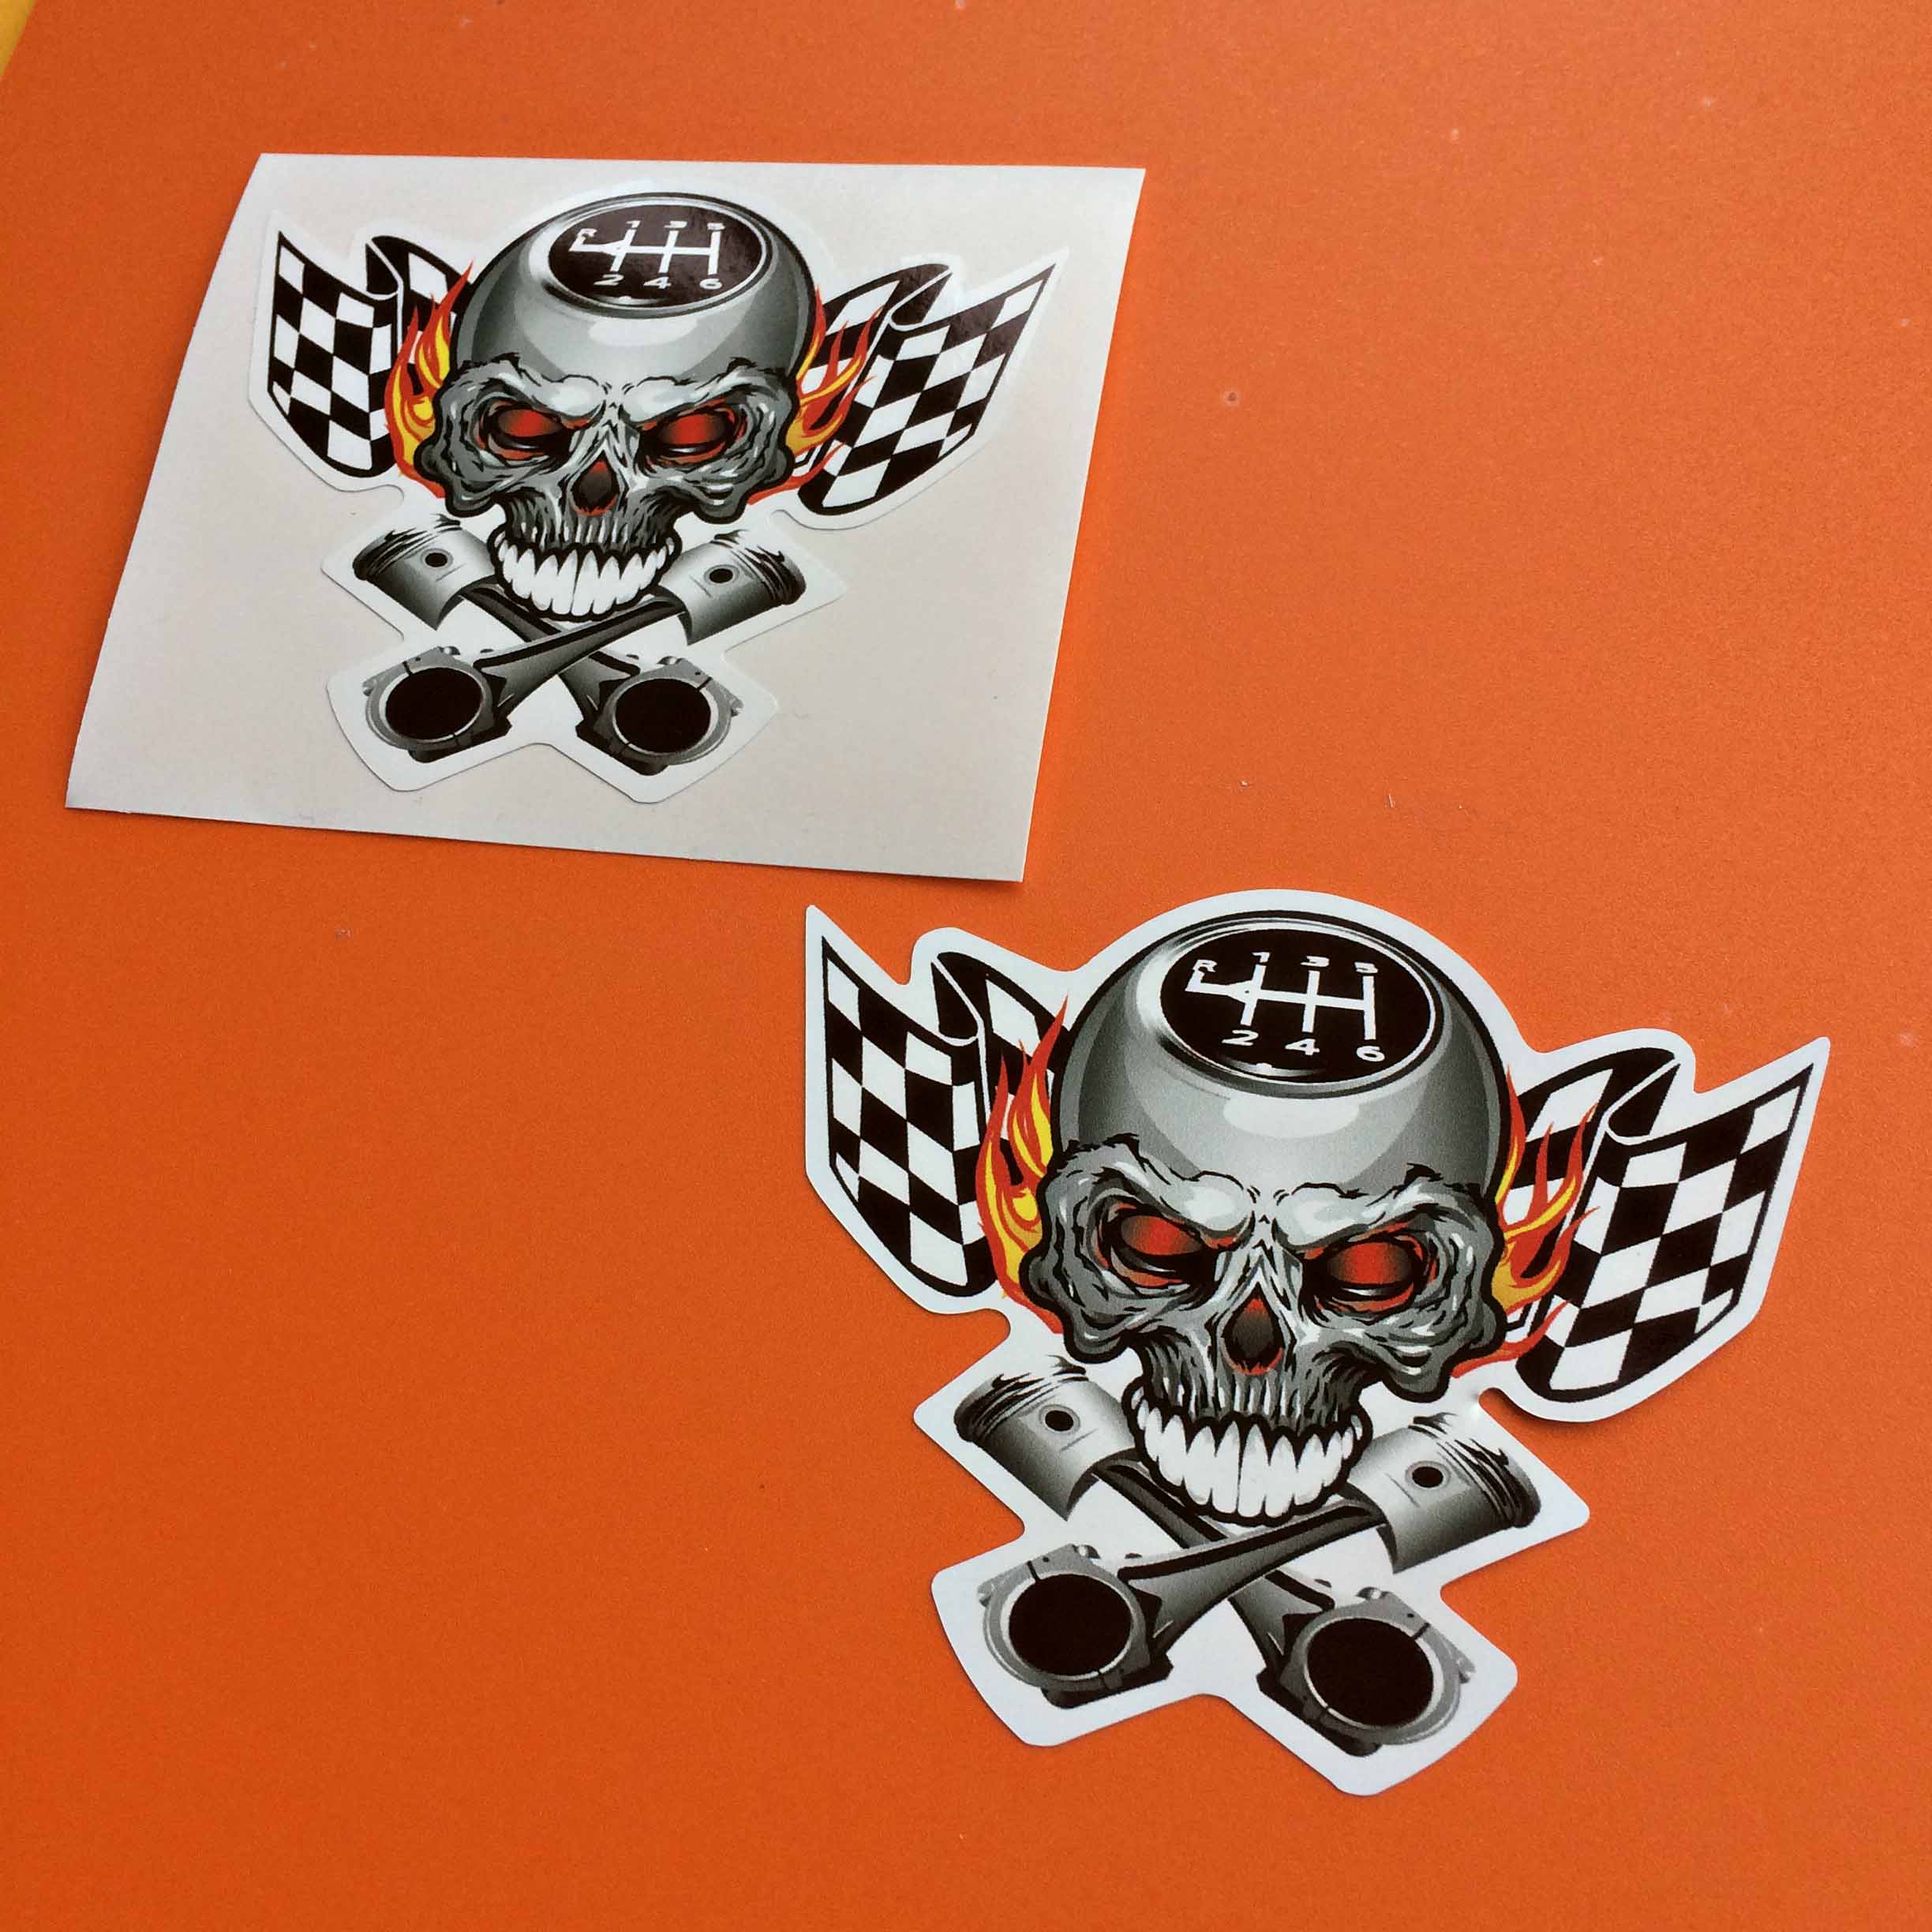 Two crossed pistons below a silver skull with red eyes and white teeth. On the scalp of the skull are the symbols R 1 2 3 4 5 6 as on a car gearstick. A chequered flag and flames are in the background.